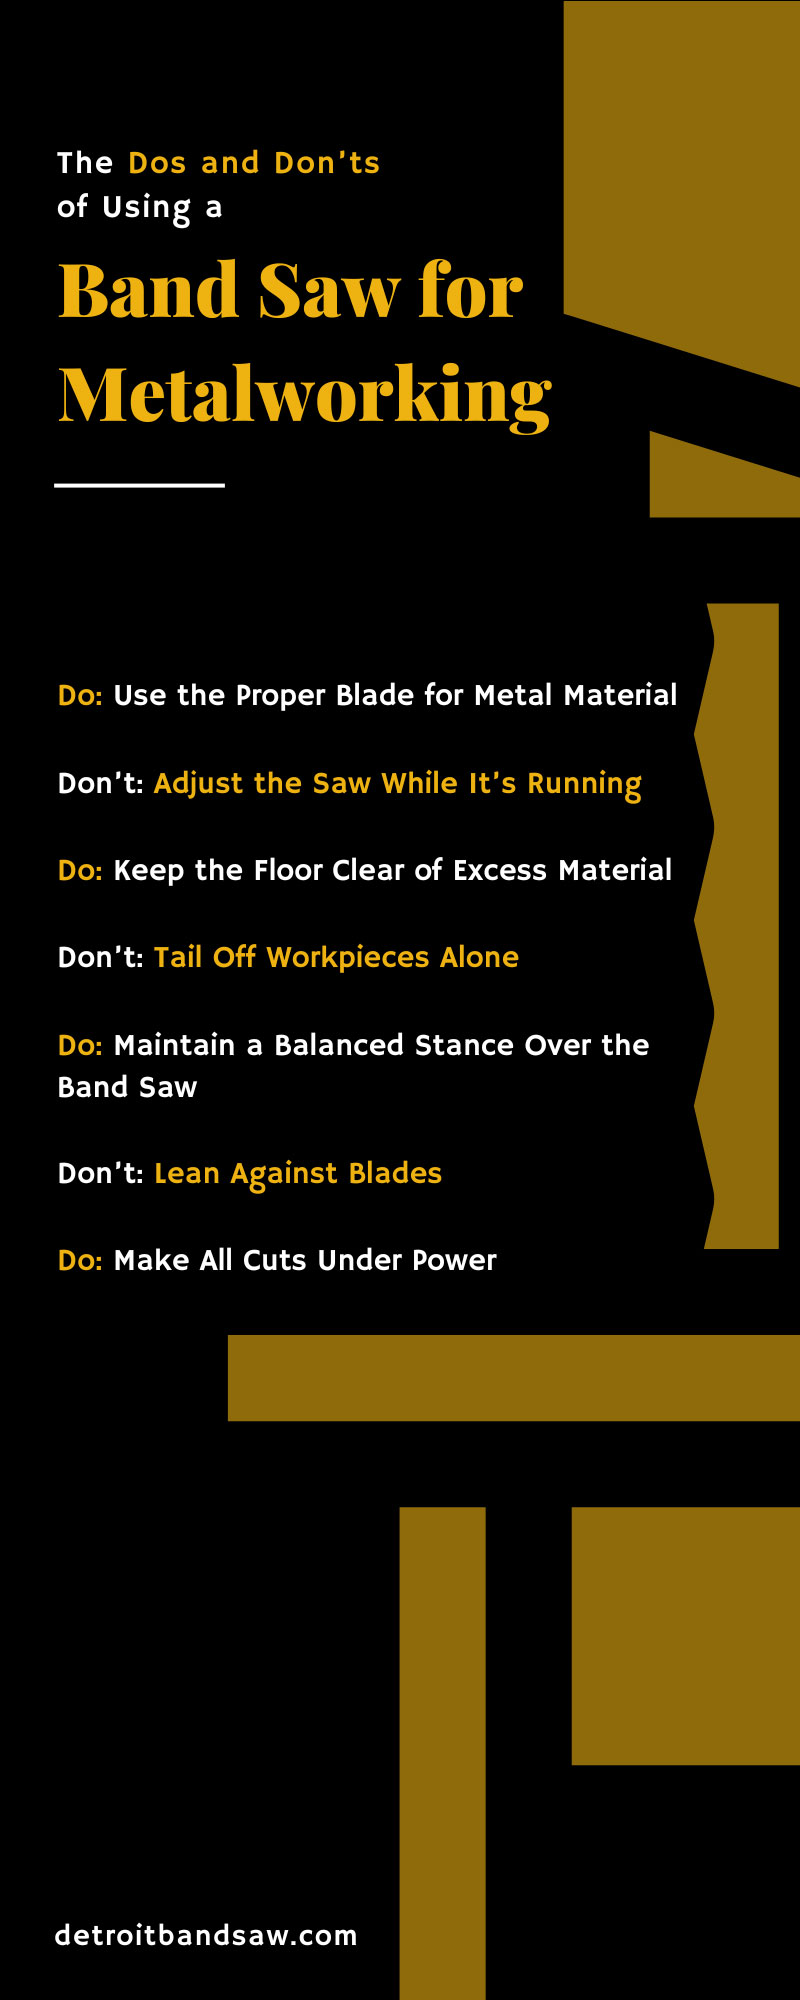 The Dos and Don’ts of Using a Band Saw for Metalworking